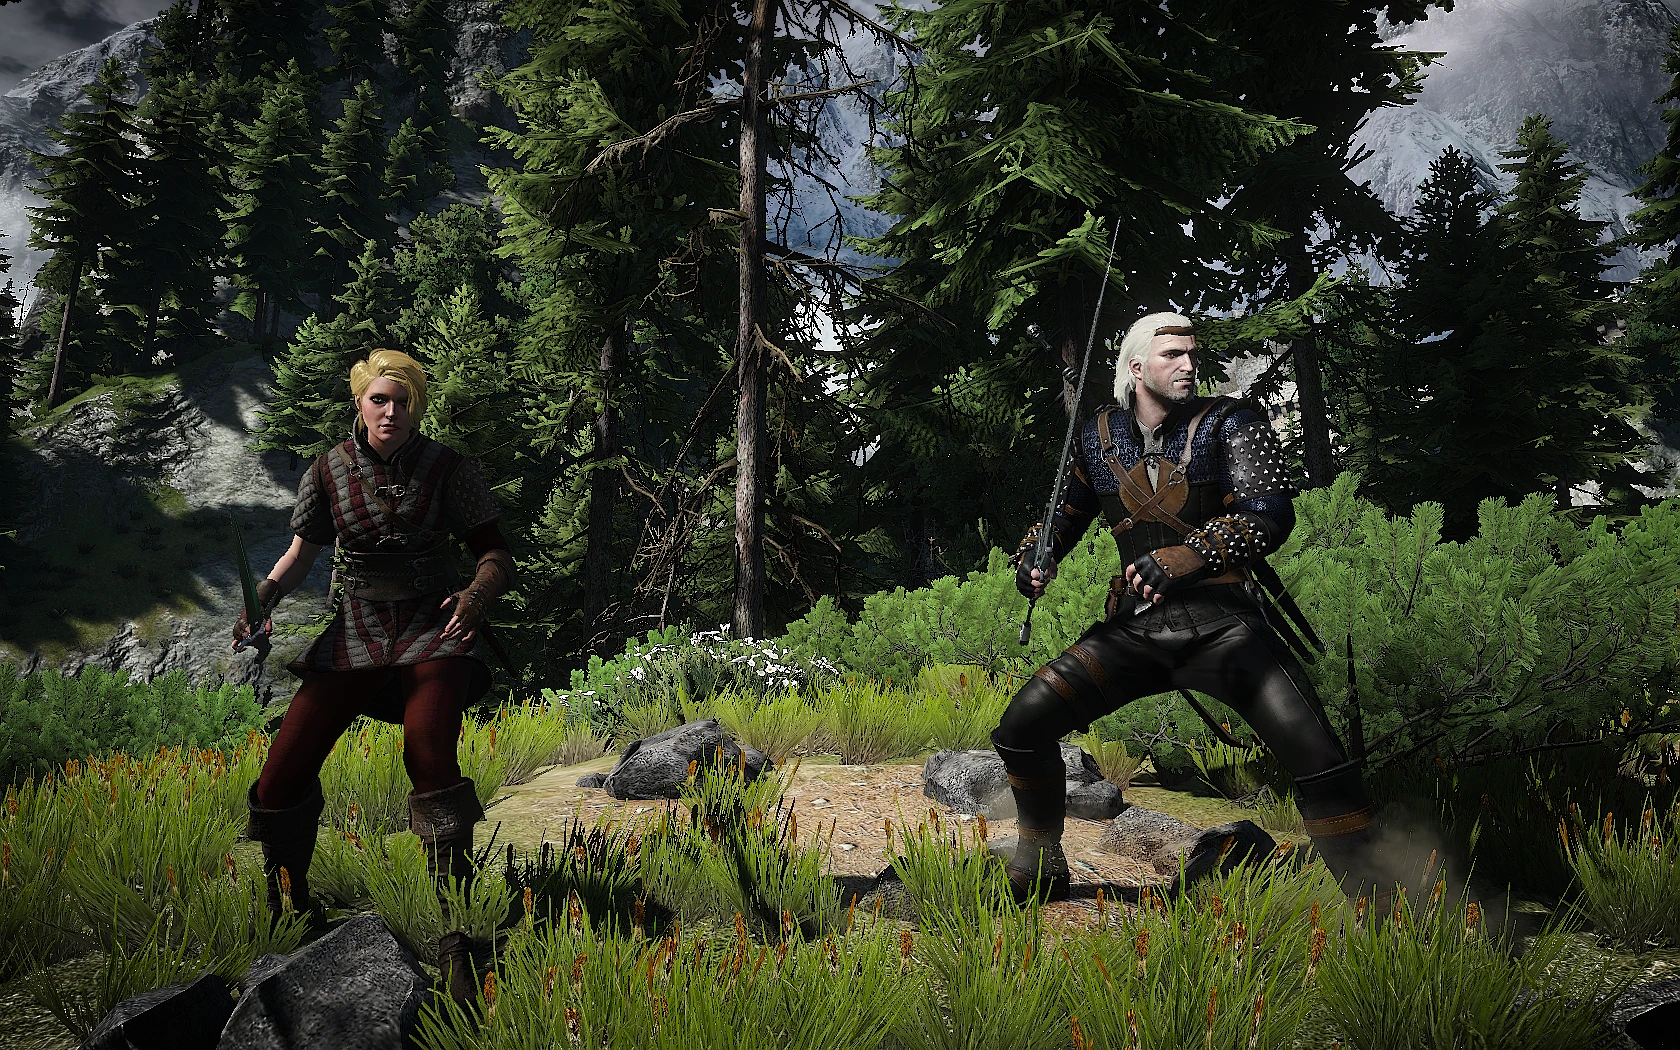 Alternate appearances witcher 3